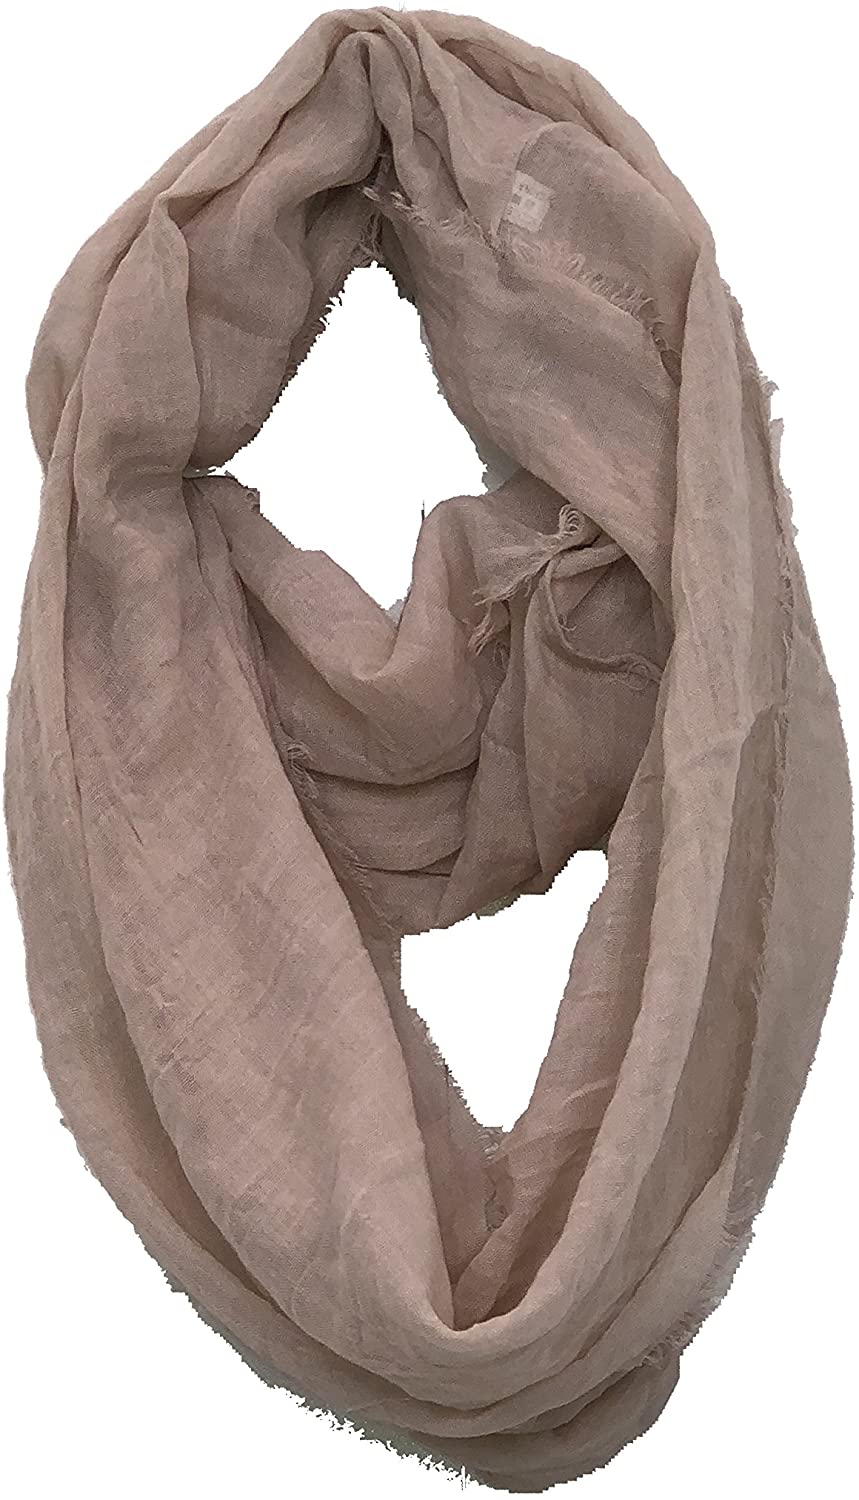 Plain beige snood with frayed edge